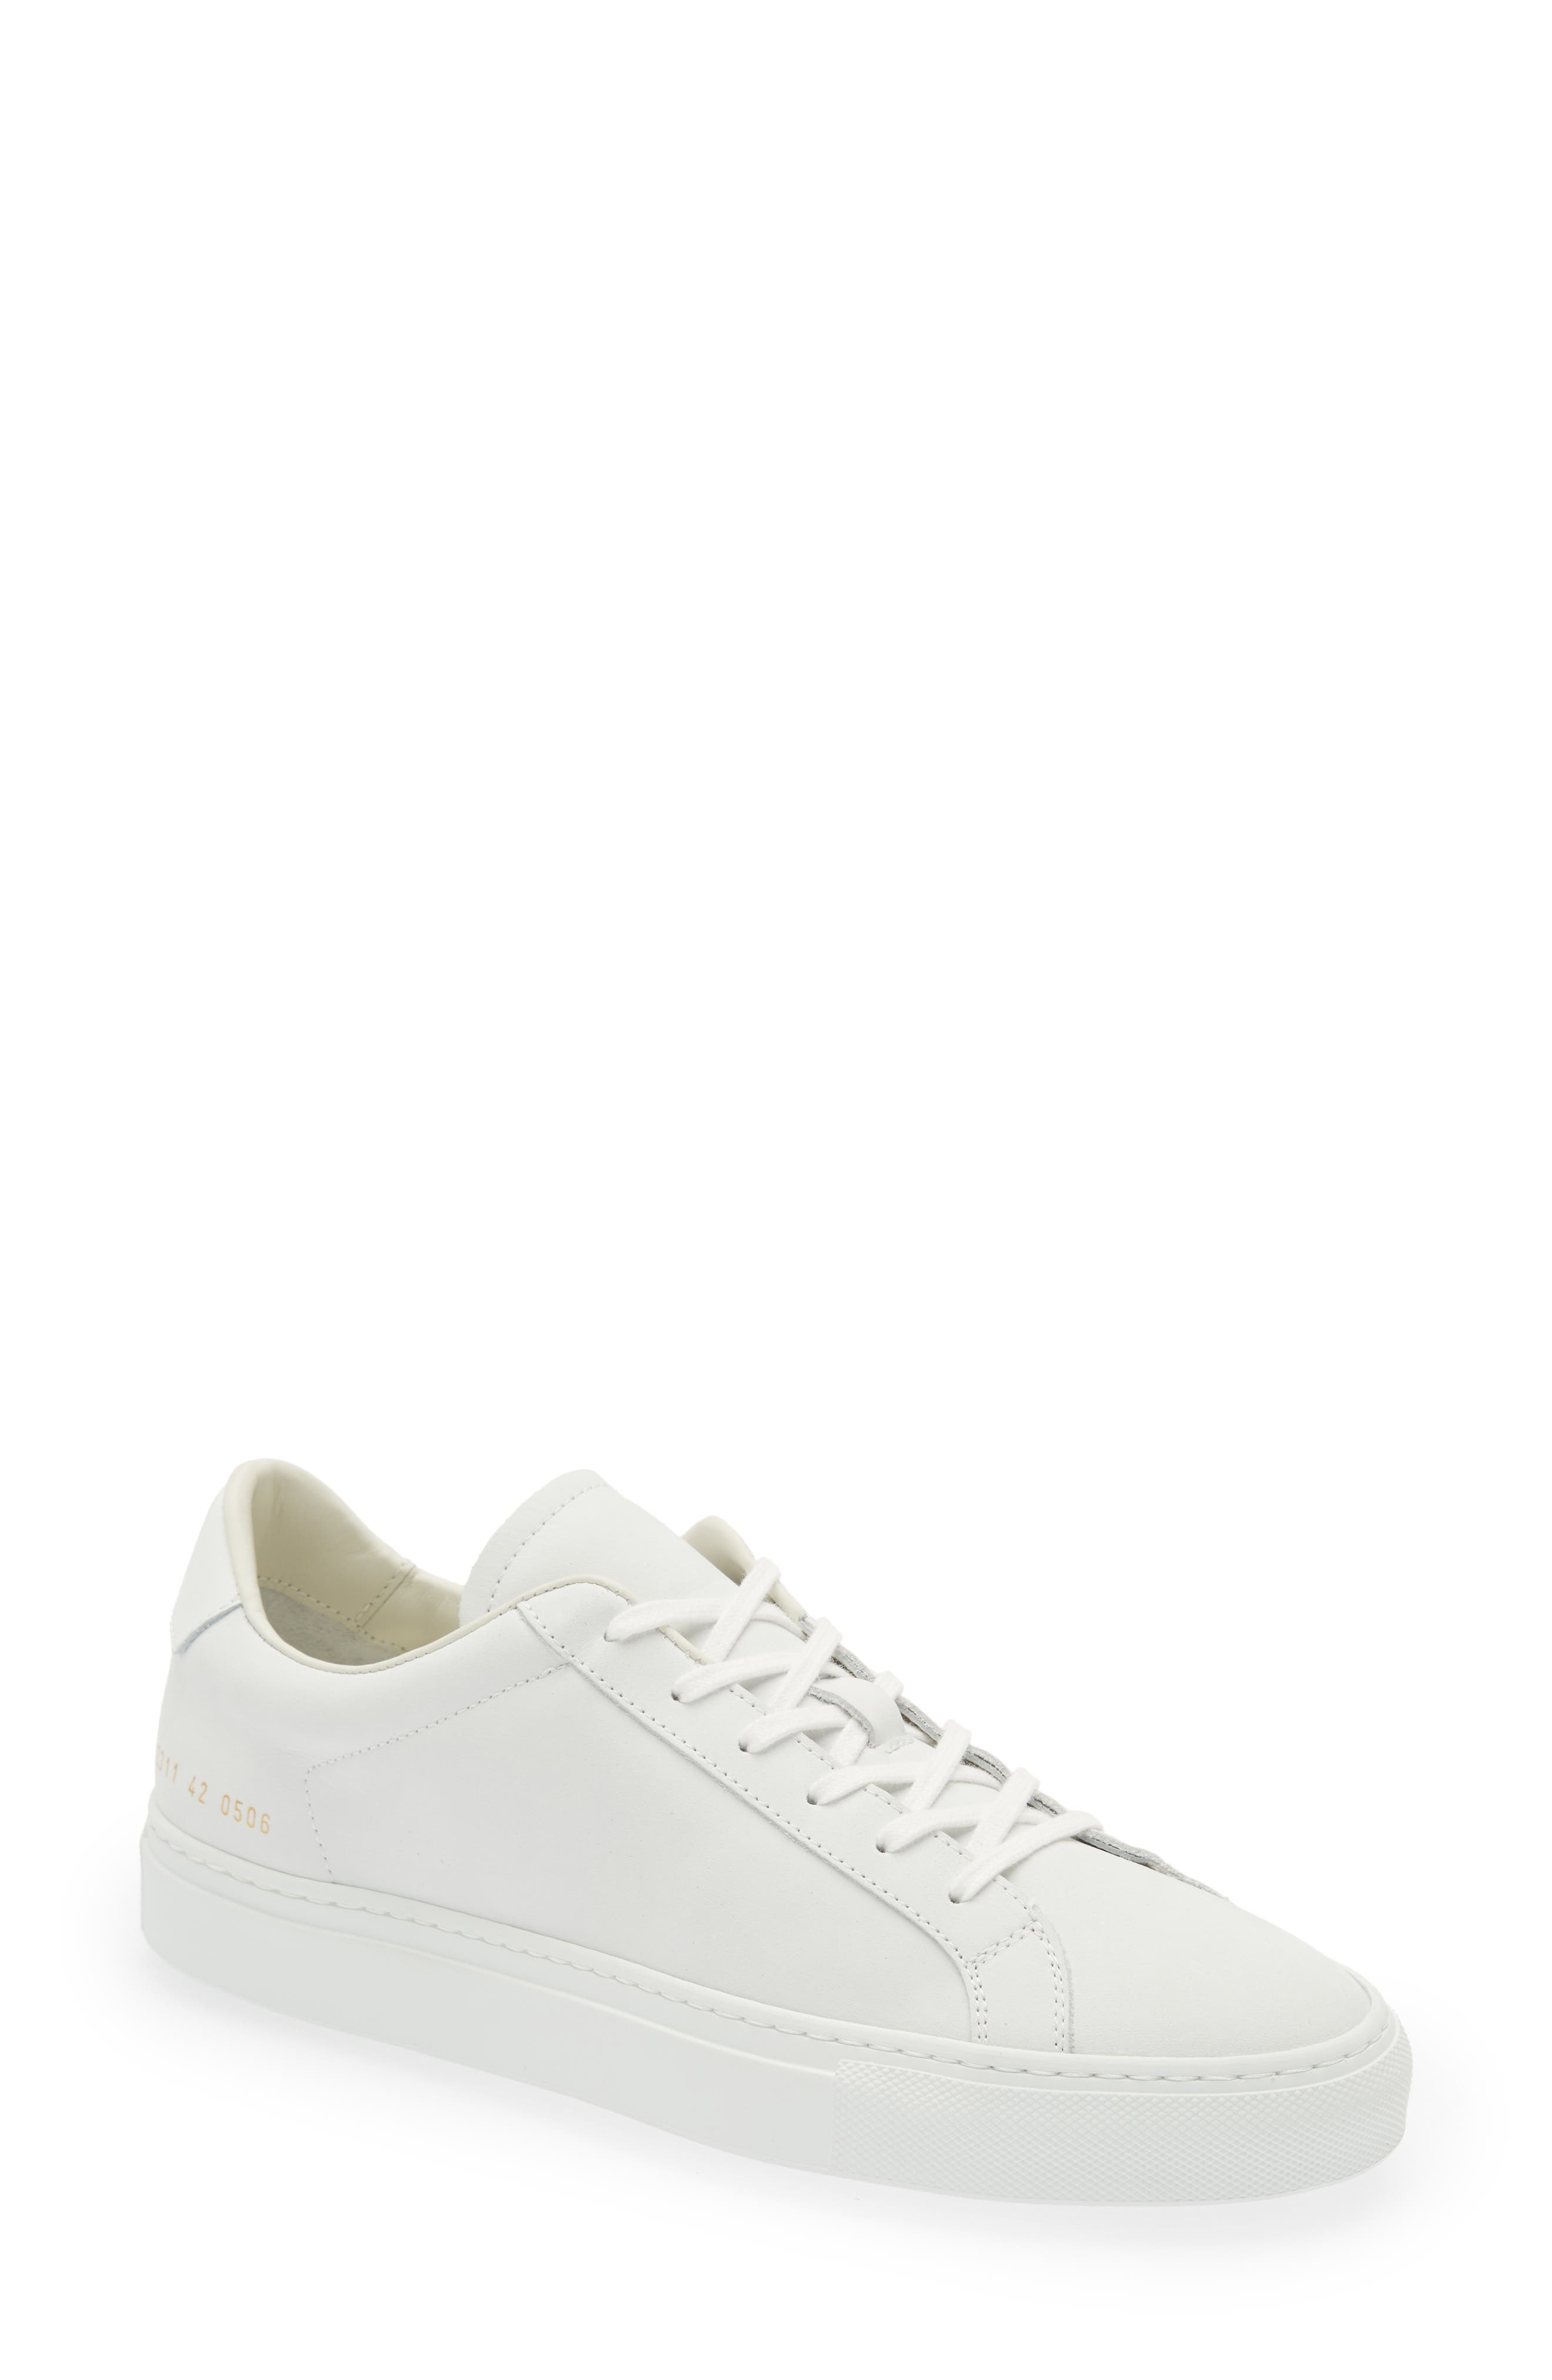 Common Projects Retro Low Top Sneaker in White/White at Nordstrom, Size 7Us